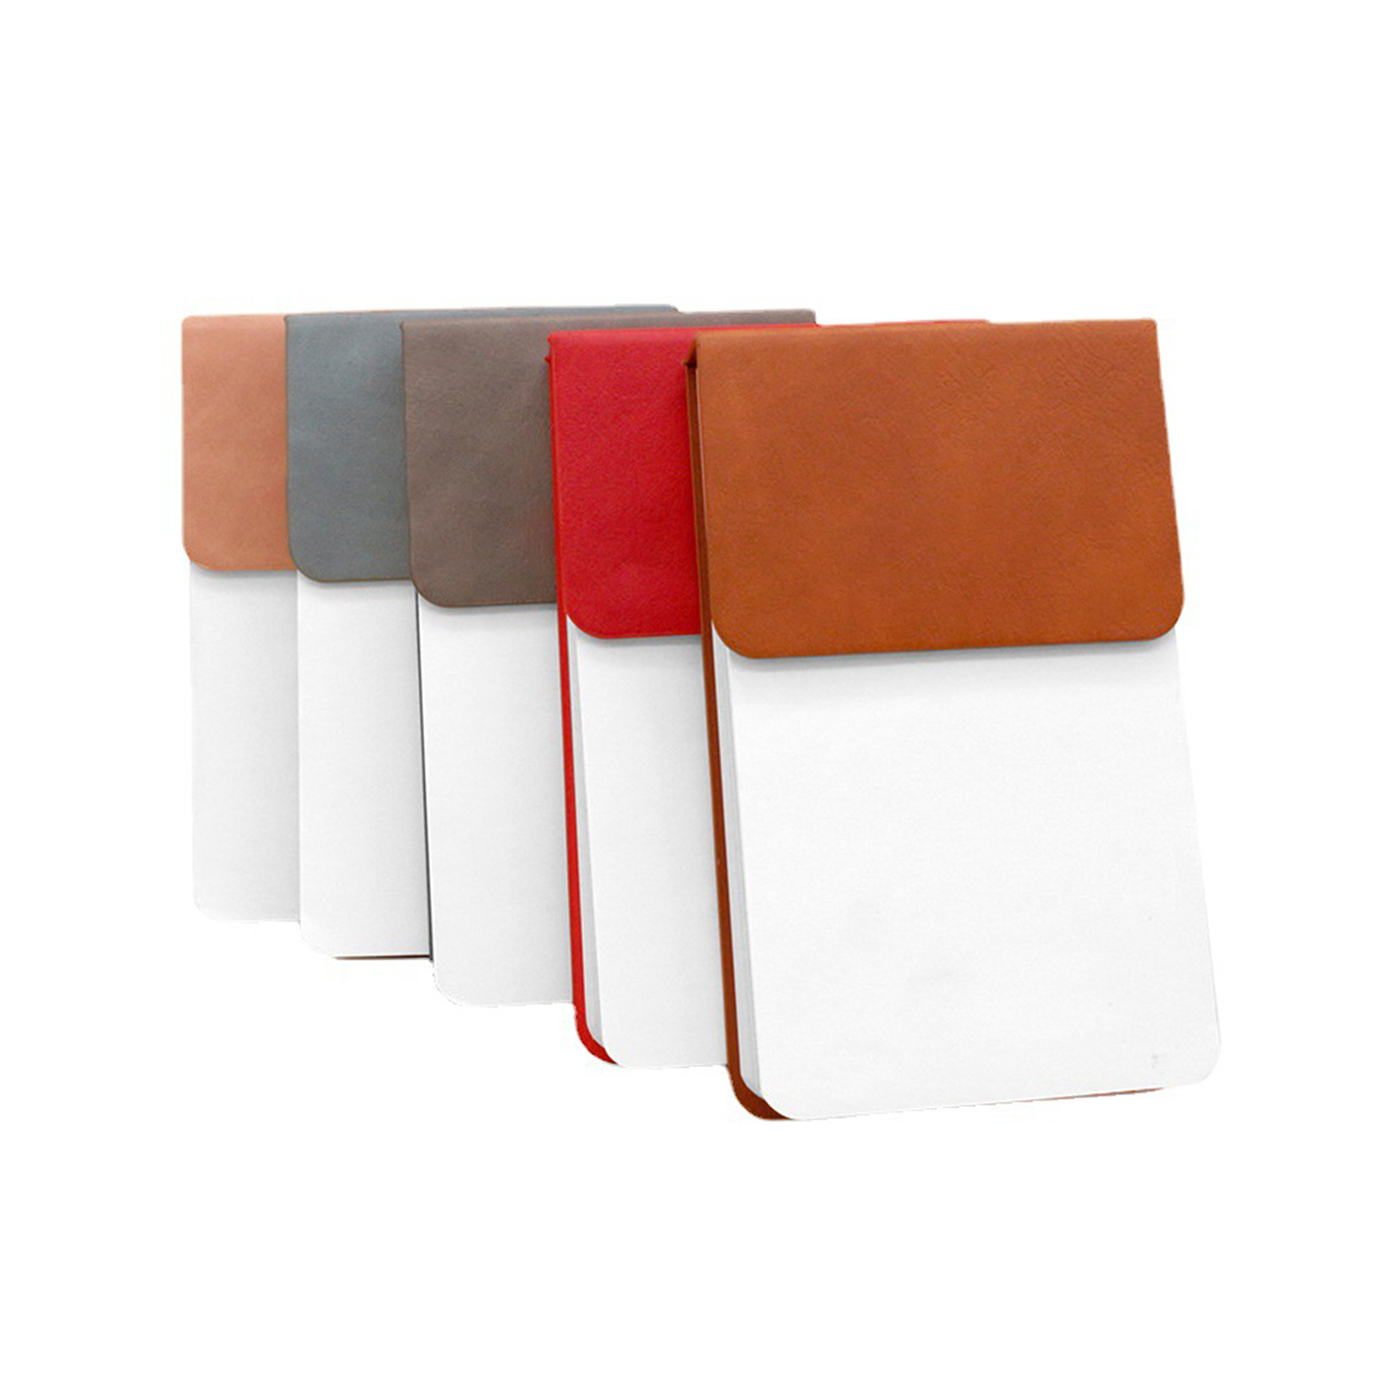 PU Leather Cover Memo Pad With Sticky Flags3